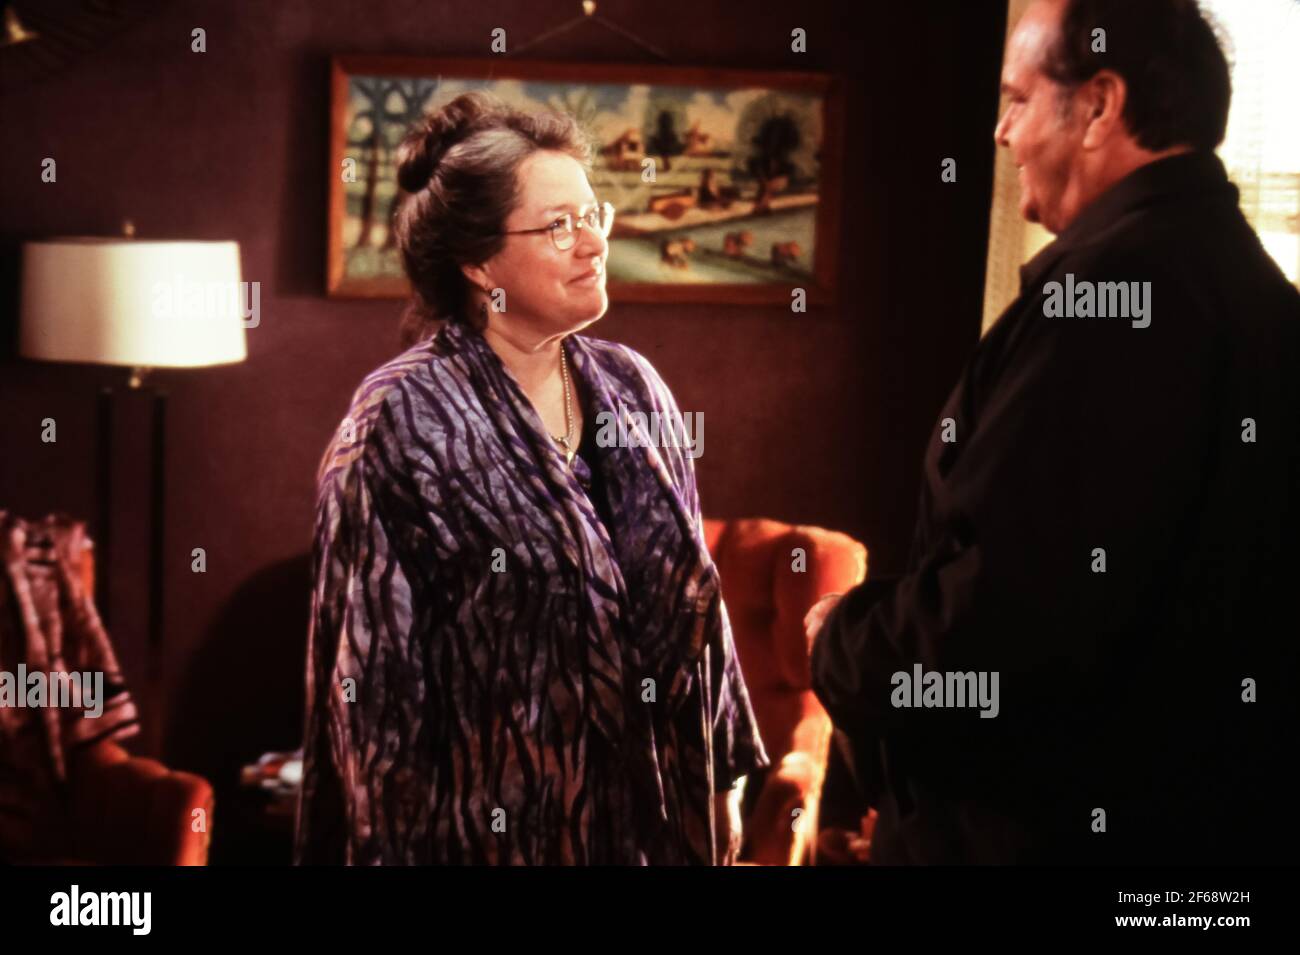 Kathy Bates About Schmidt High Resolution Stock Photography and Images -  Alamy